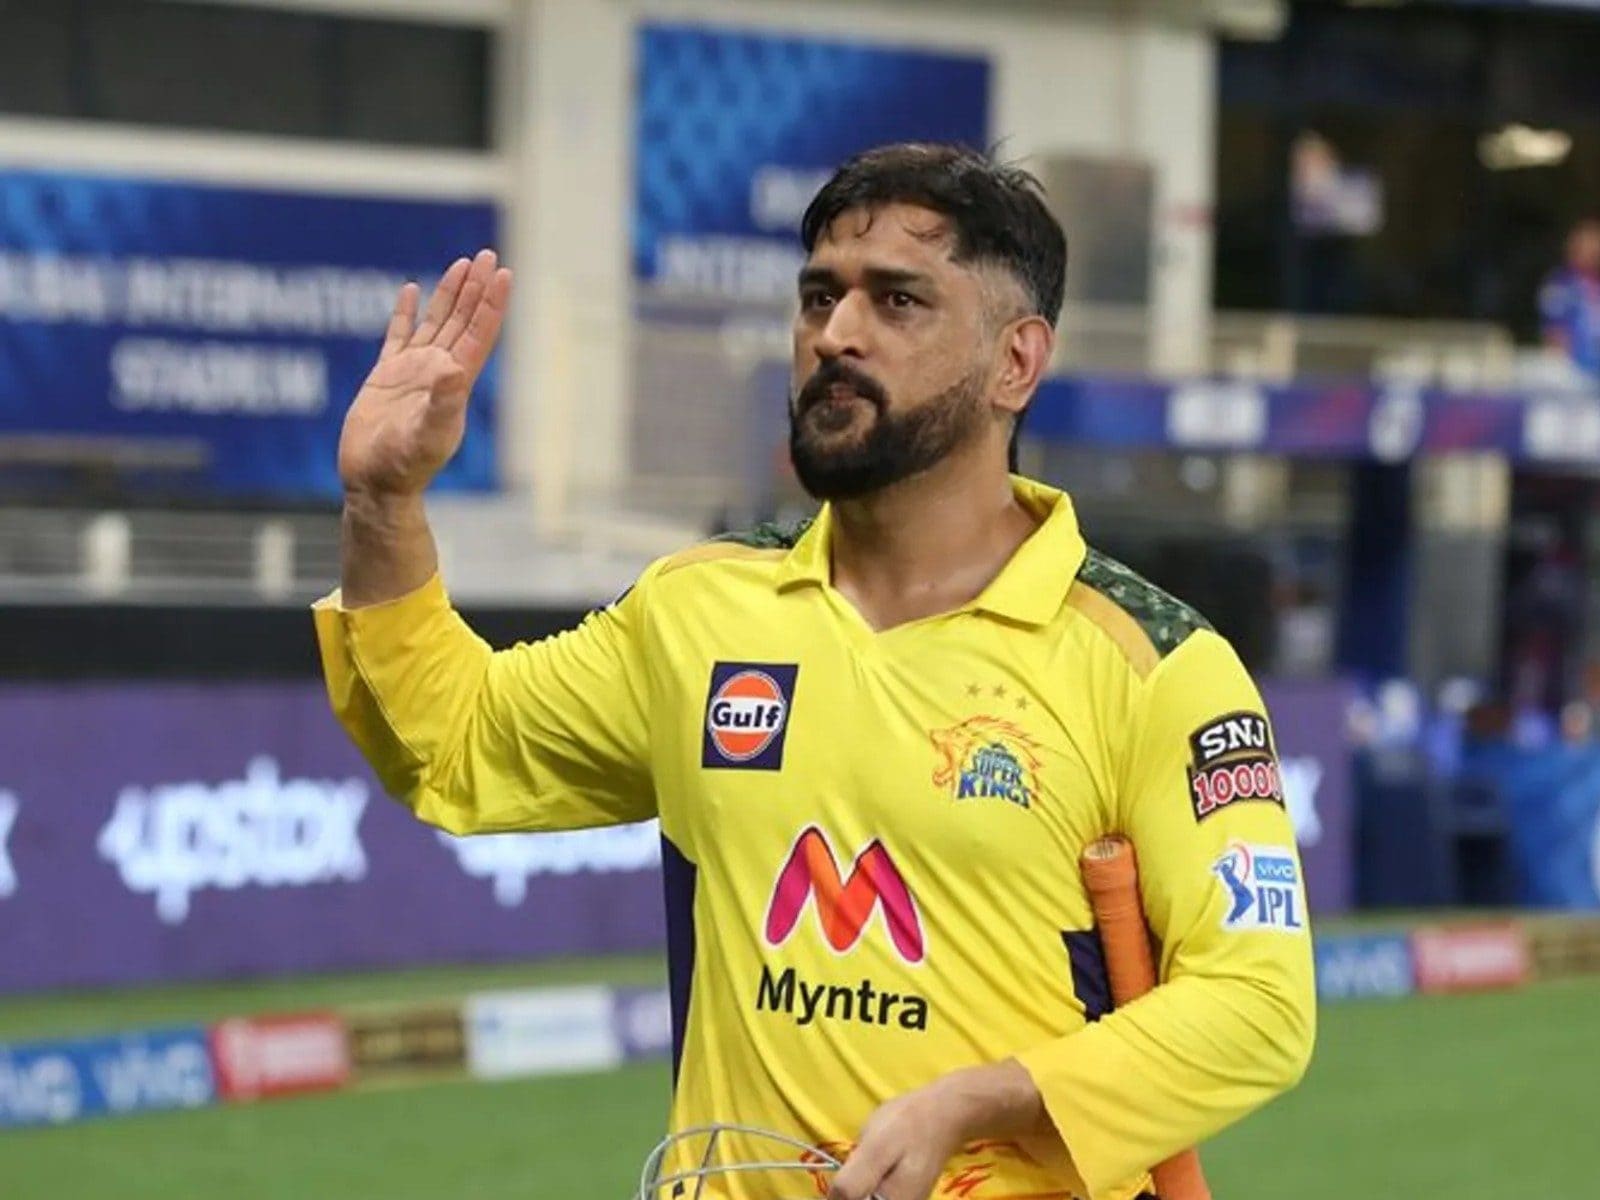 John Cena Posts MS Dhoni’s “You Can’t See Me” Gesture From IPL 2023 On Instagram 1